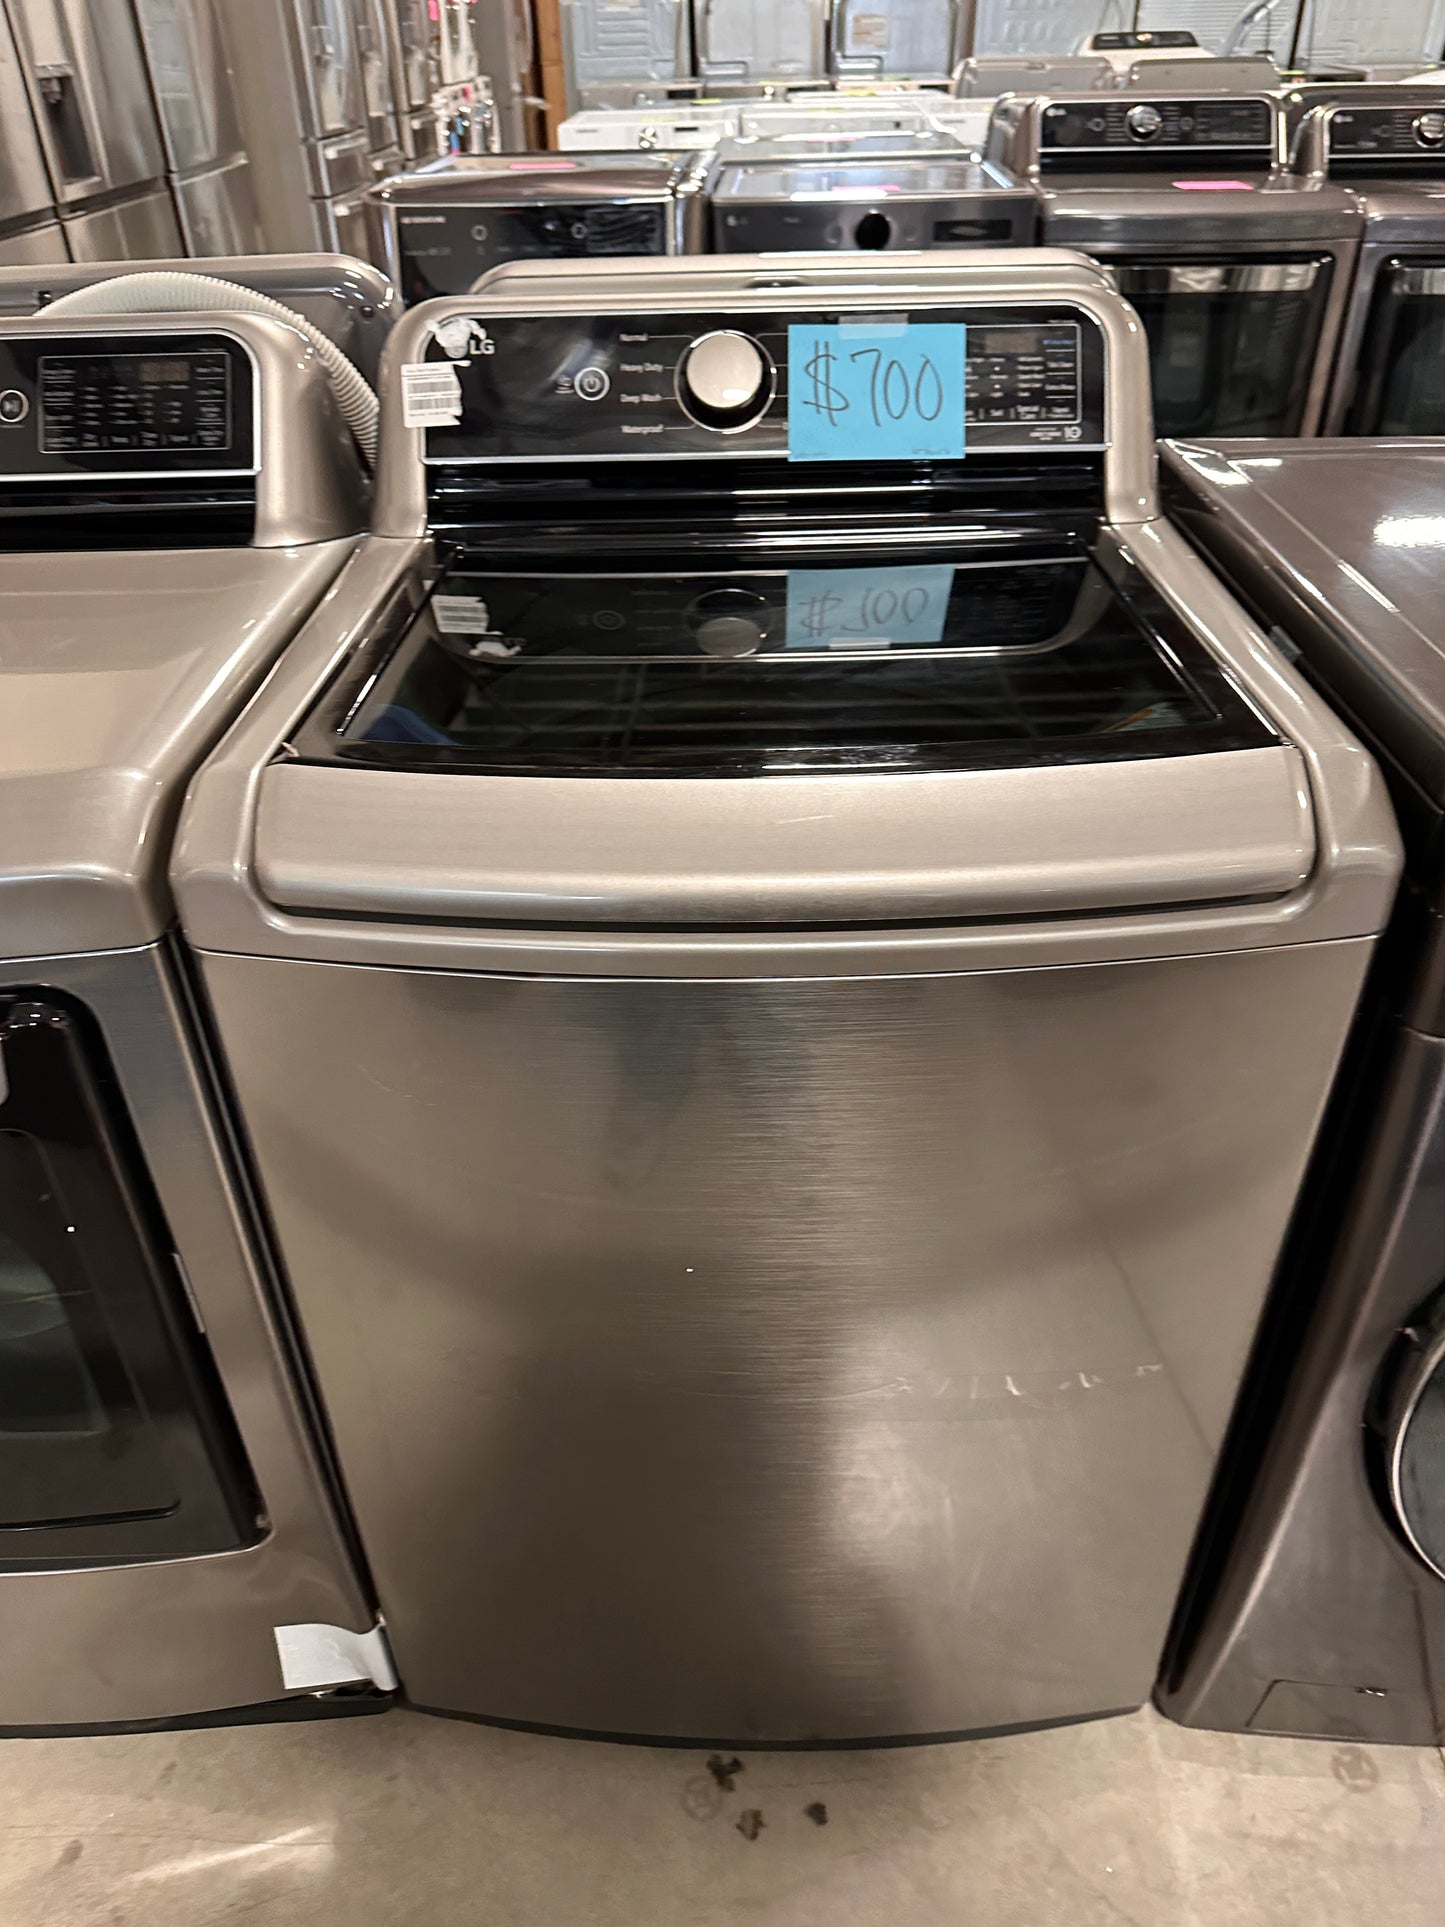 NEW SMART TOP LOAD WASHER with TURBOWASH3D - WAS12892